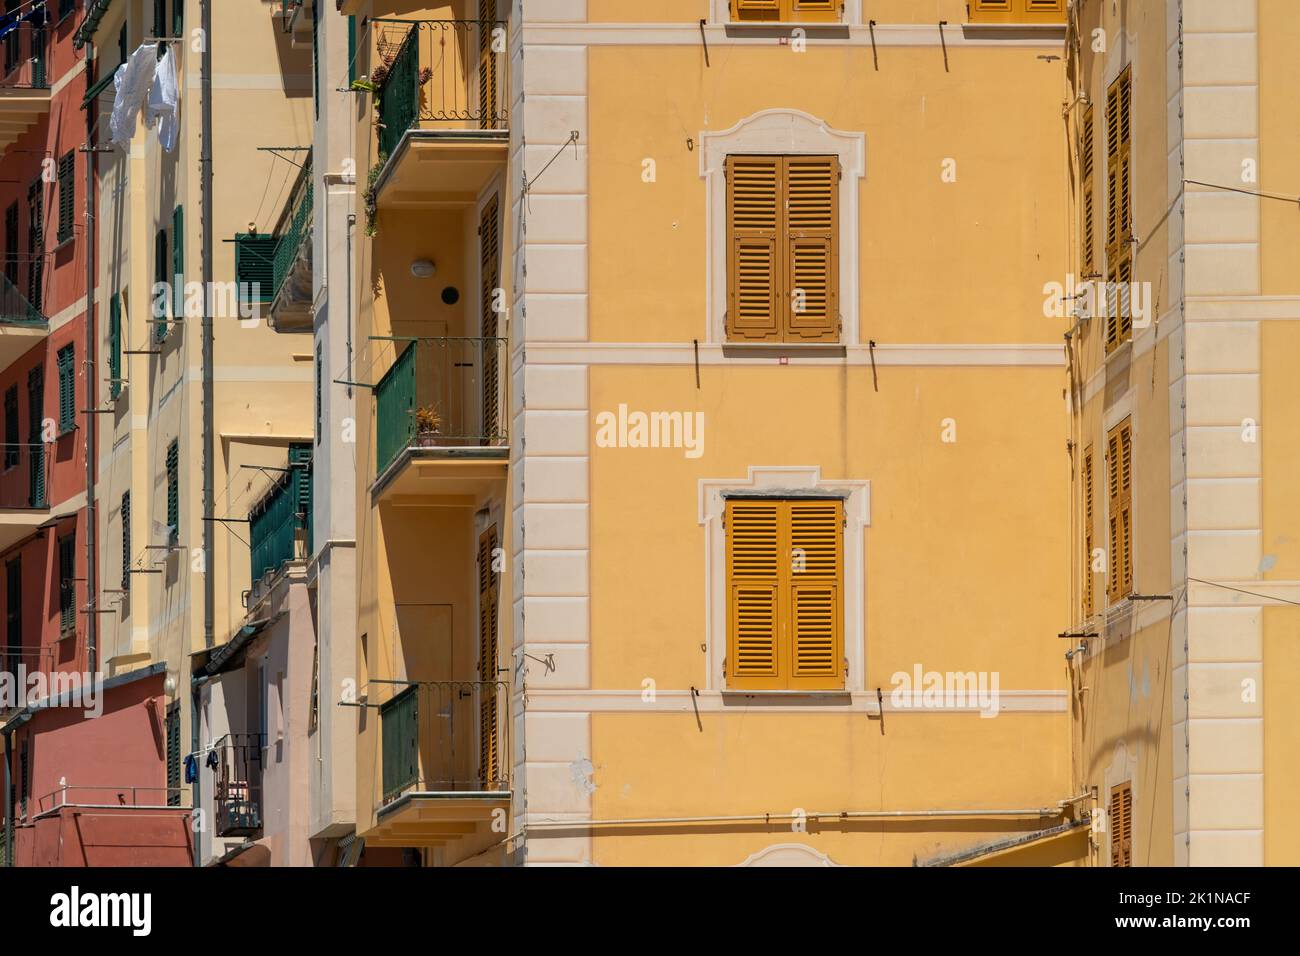 Shuttered windows and colorful residential buildings in the seaside town of Camogli, Italy. . Stock Photo